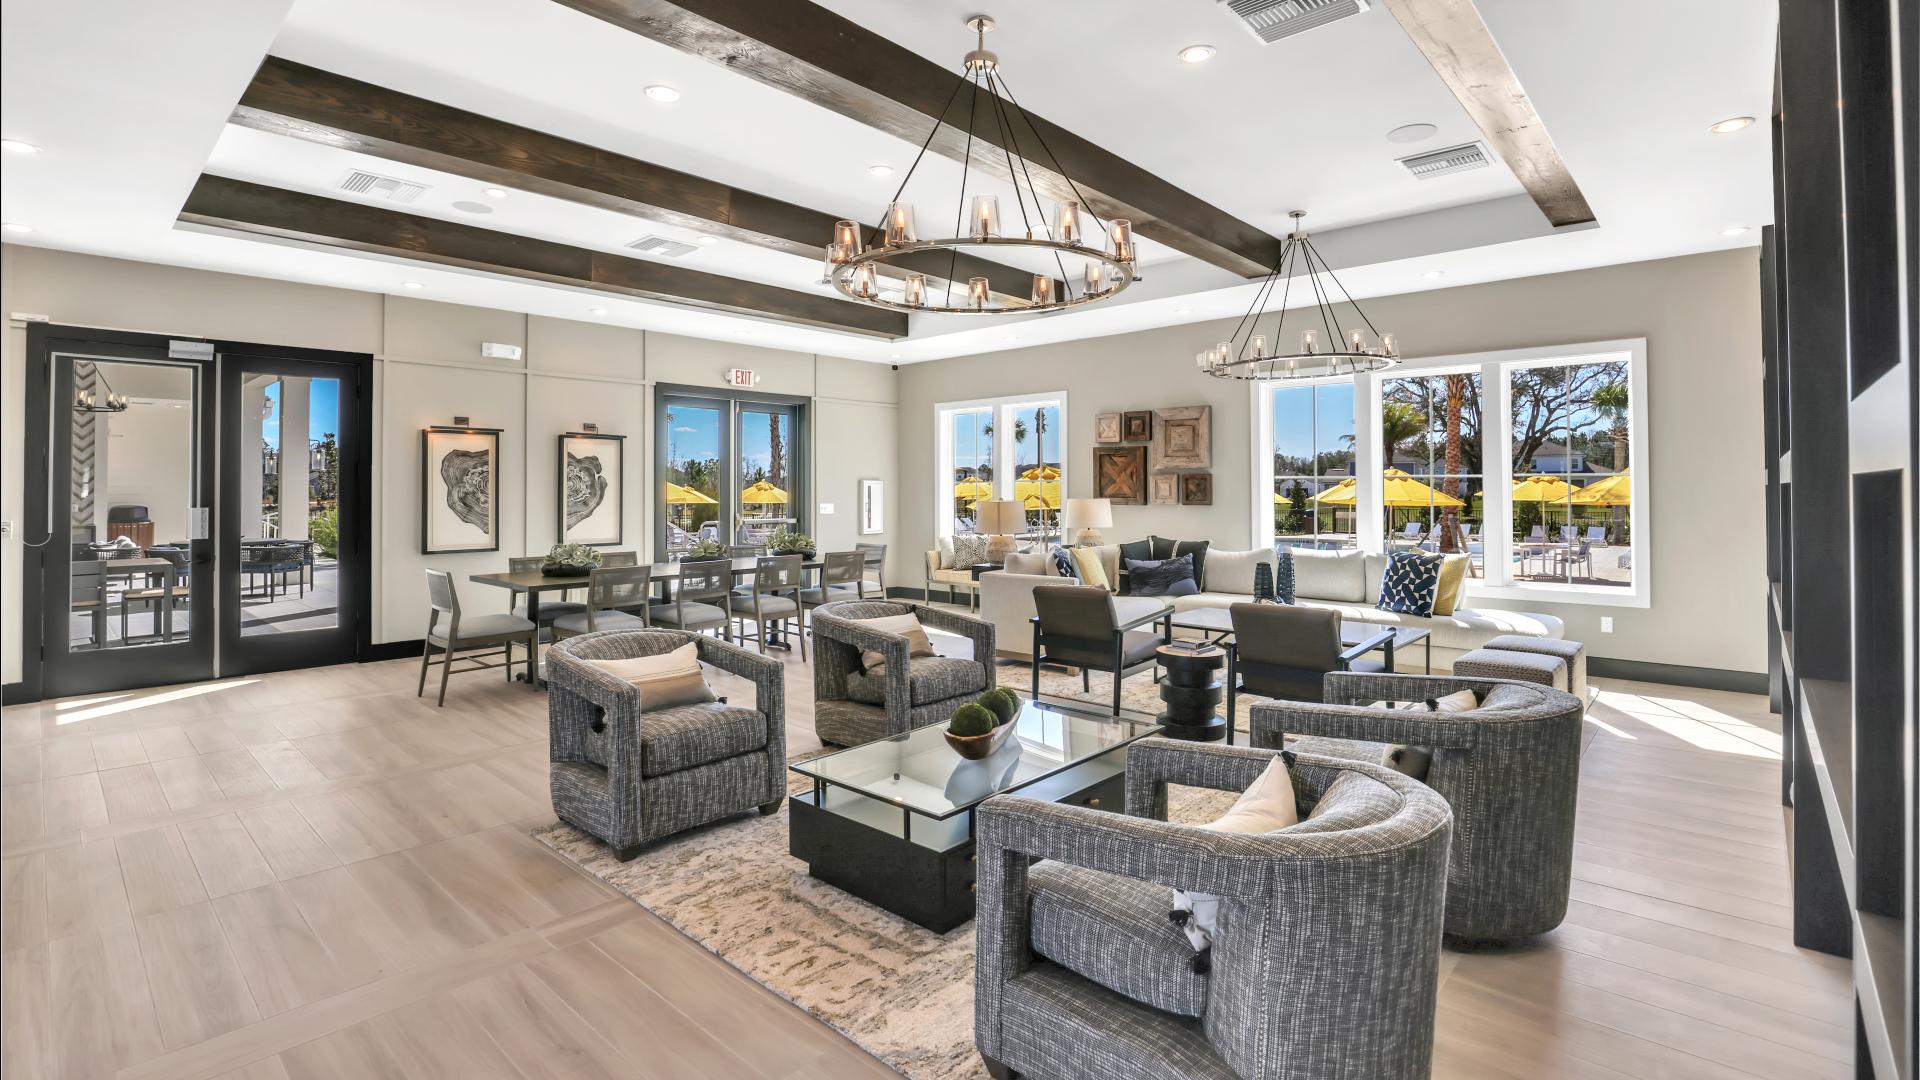 Enjoy socializing with neighbors in the brand new clubhouse